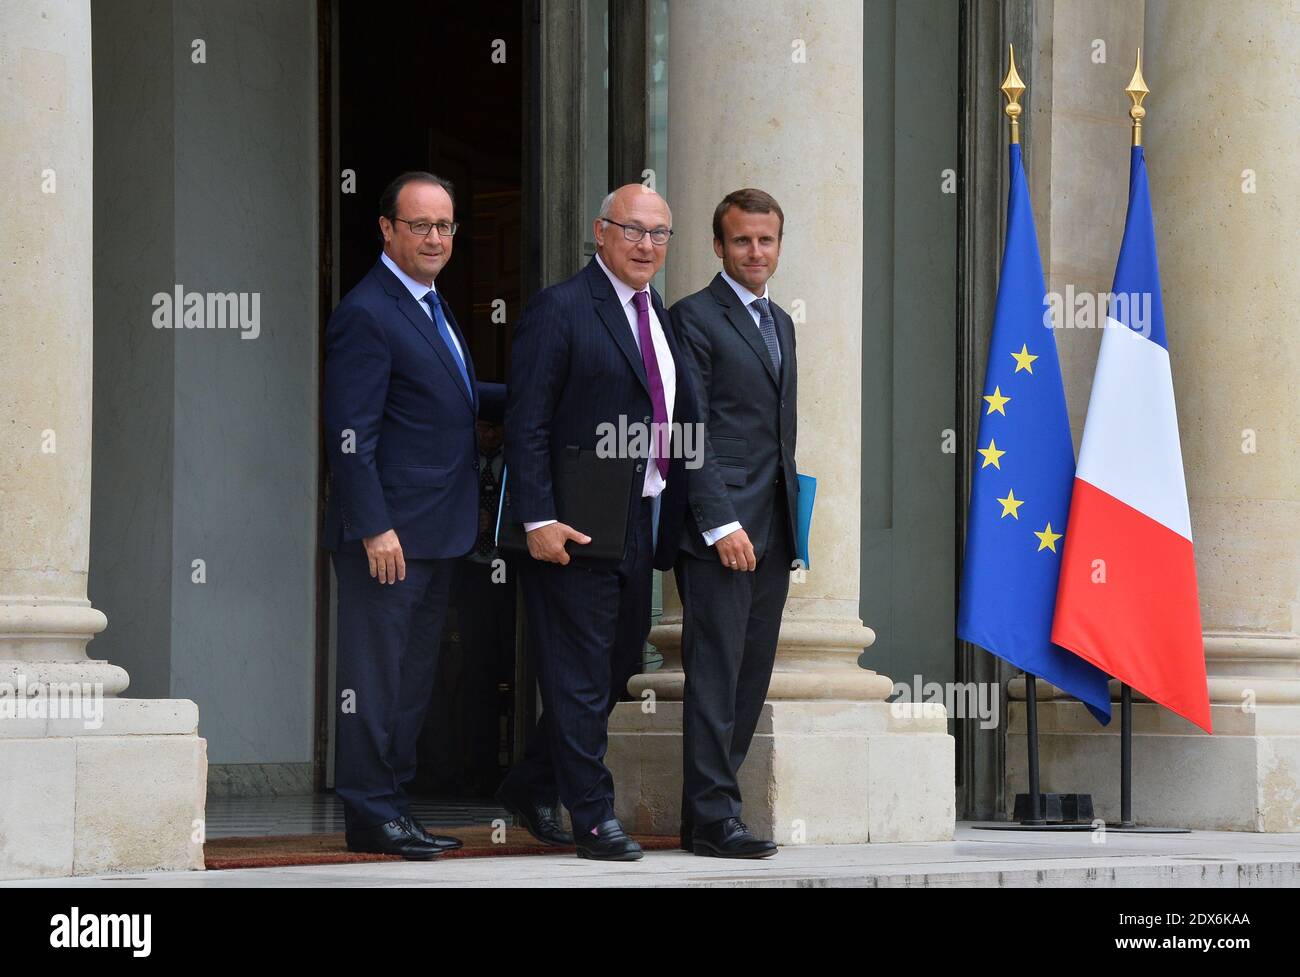 President Francois Hollande, French Finance Minister Michel Sapin and newly-appointed Economy Minister Emmanuel Macron leaving the Elysee presidential palace in Paris, France after a weekly cabinet meeting. French President Francois Hollande on August 27 installed a former banker and ally as economy minister in an emergency reshuffle seen as the 'last chance' to haul France out of the biggest crisis of his presidency. Hollande caught everyone off guard with the appointment of Emmanuel Macron, a 36-year-old ex-Rothschild banker and architect of the president's economic policy. Photo by Christia Stock Photo